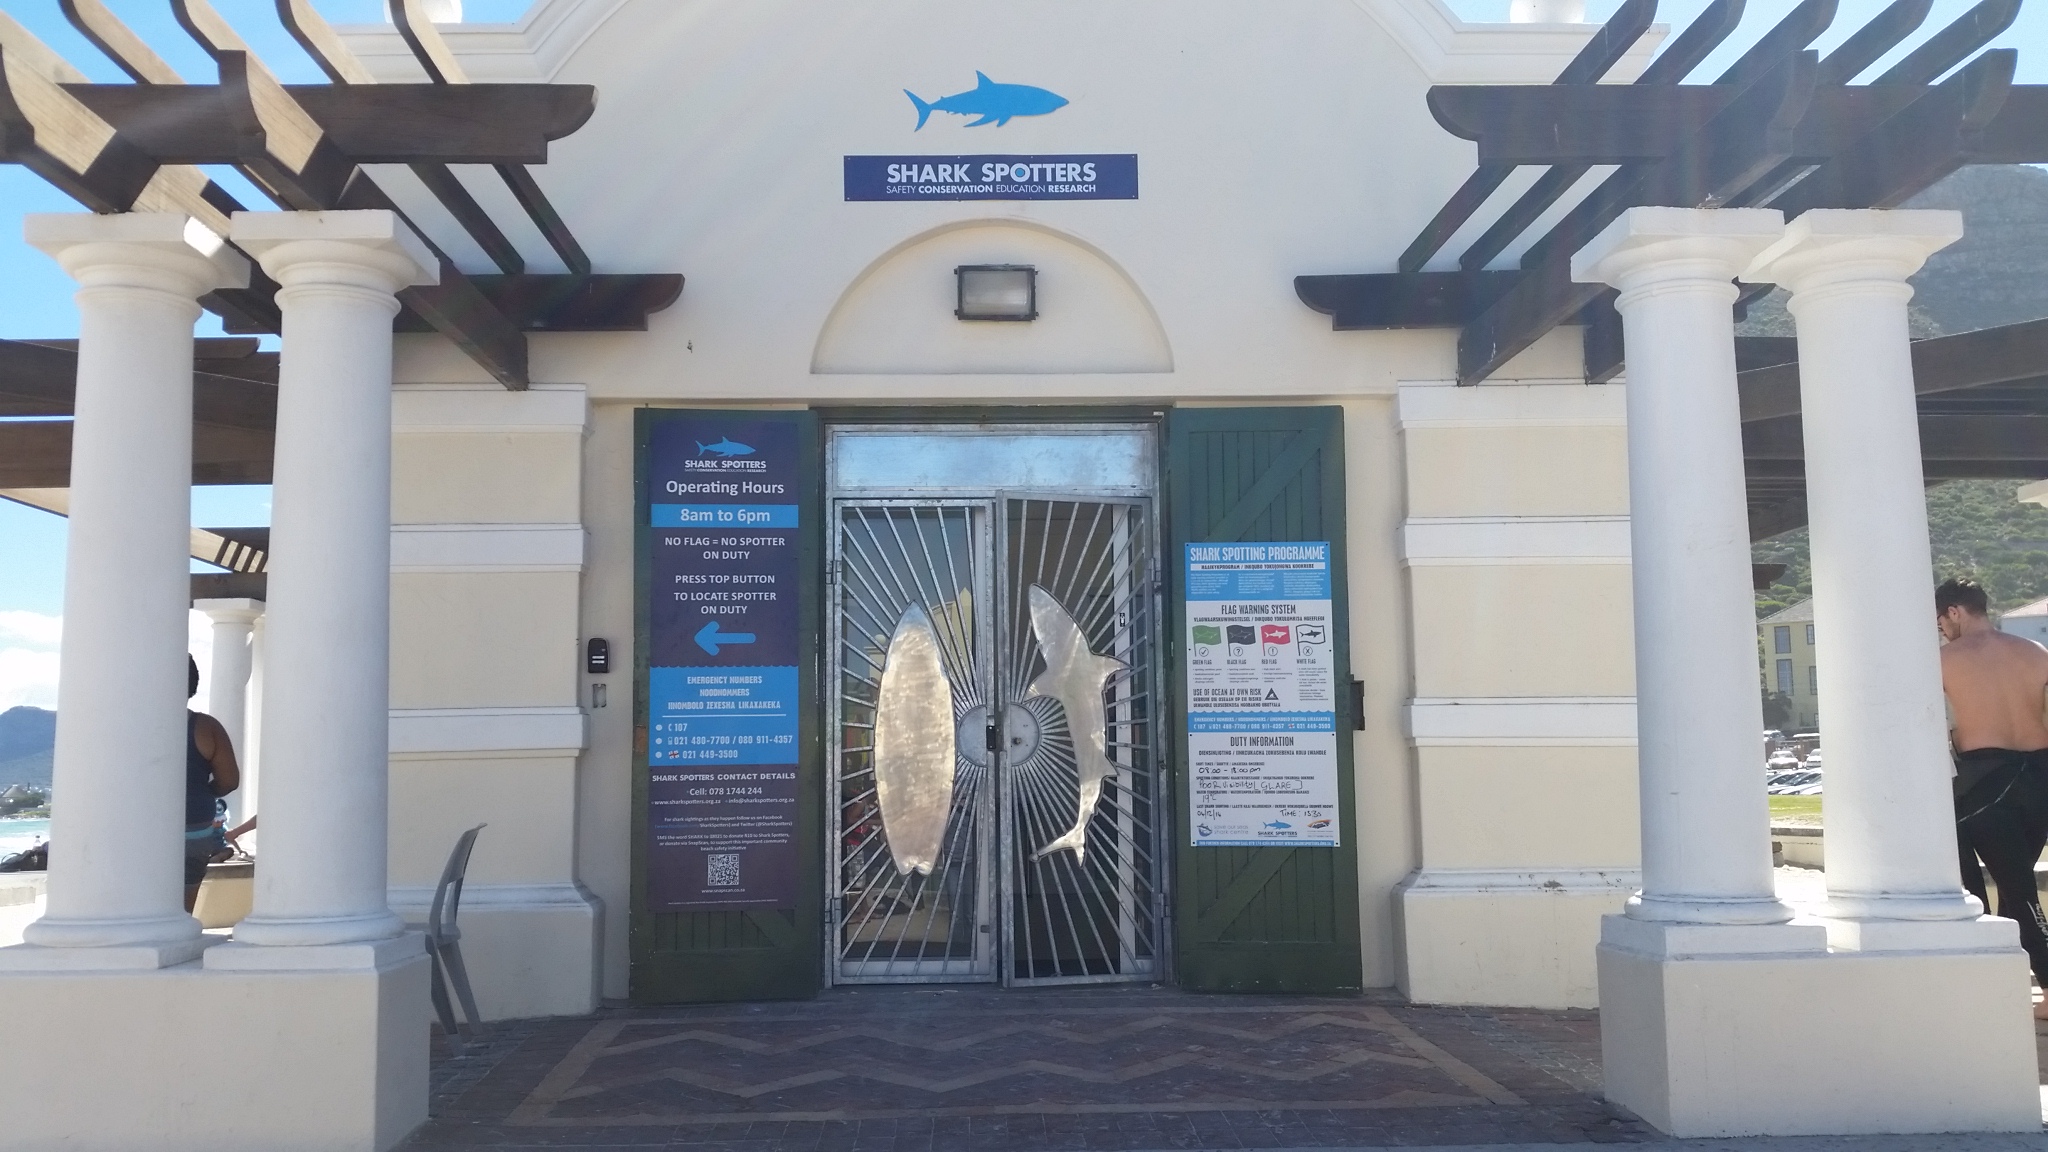 Education is key to a successful shark safety strategy. In 2014 Shark Spotters opened an Info Centre on Muizenberg beach that serves as an interactive space where members of the public can learn about shark safety and ocean conservation issues. © Shark Spotters